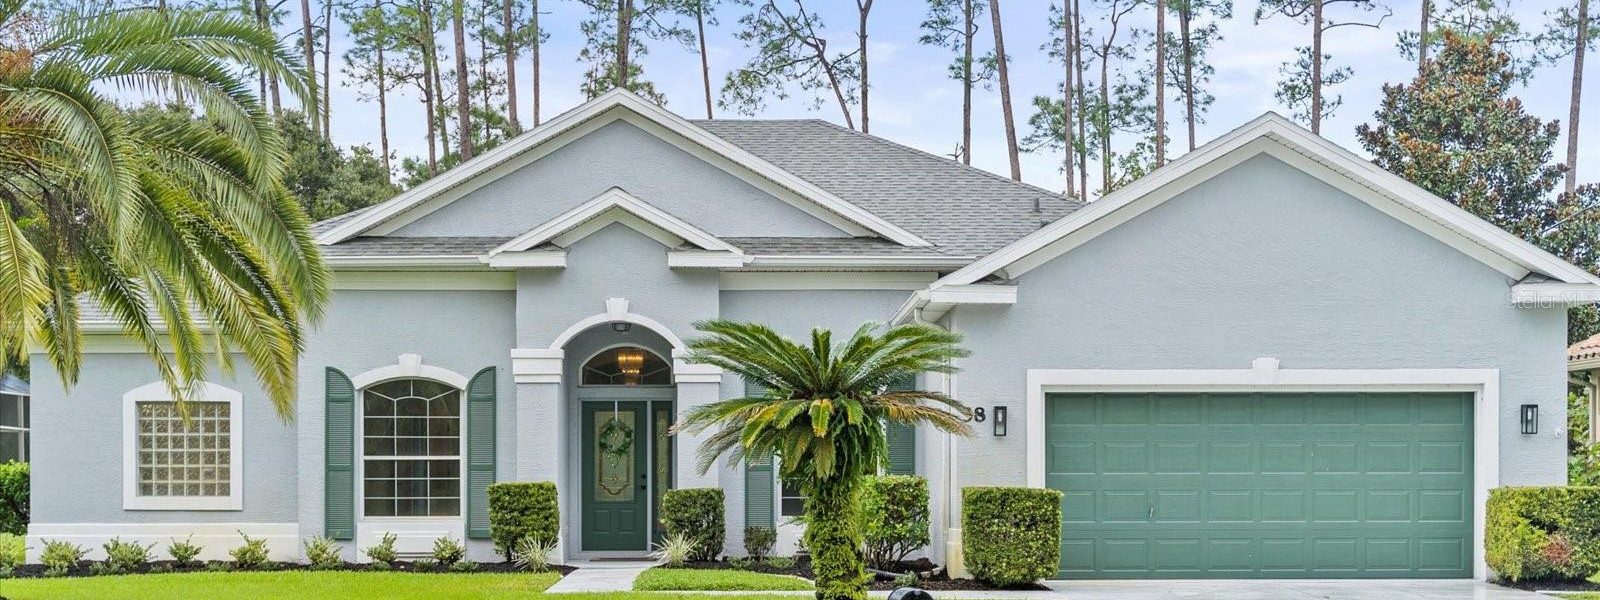 Florida's Housing Heroes Buy and Sell Your Home Now